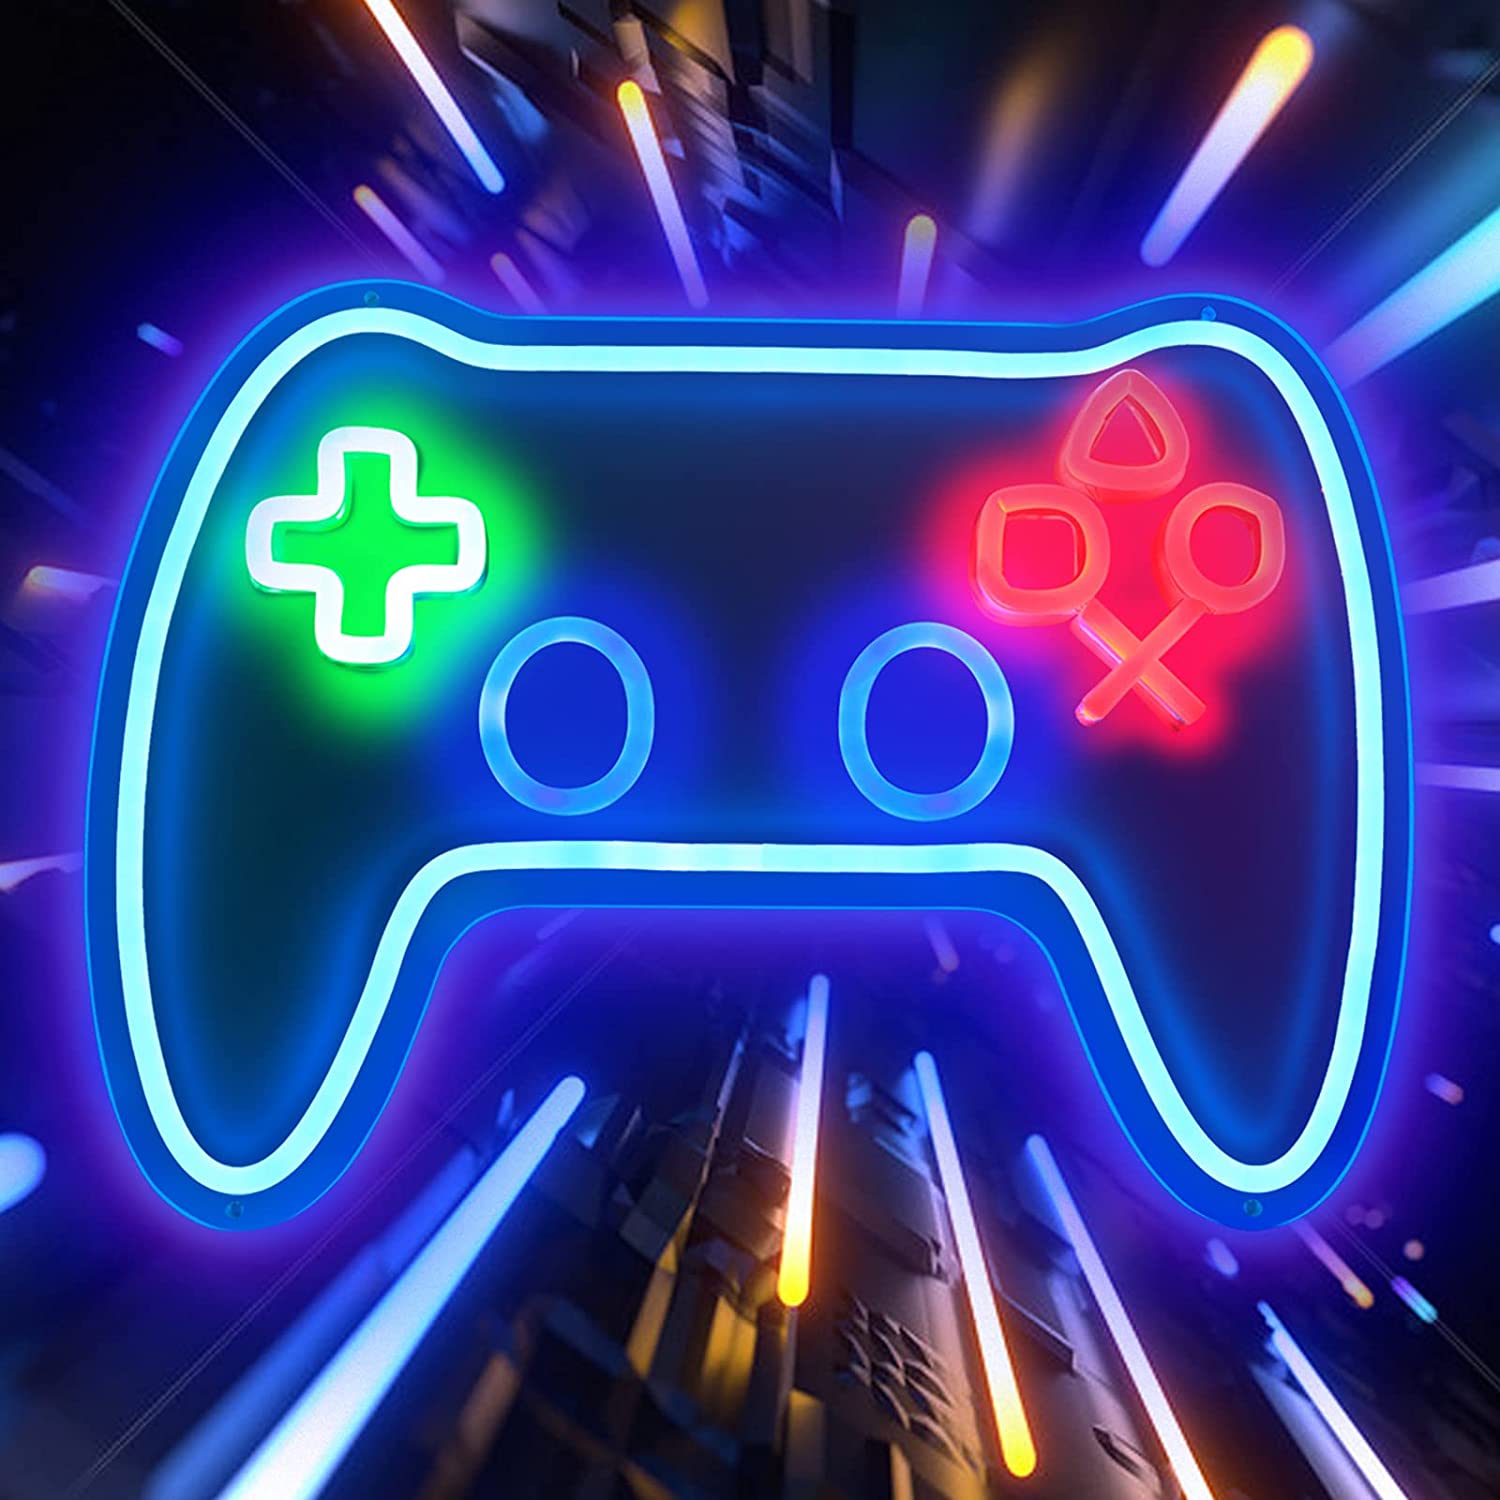 Buy Game Shaped Neon Signs 16''x 12'' LED Signs for Gamer Room Decor Bedroom Childrens Room Game Console Neon Lights Game Room Decor Gaming Neon Lights Signs Resembles for PS5 Game Controller